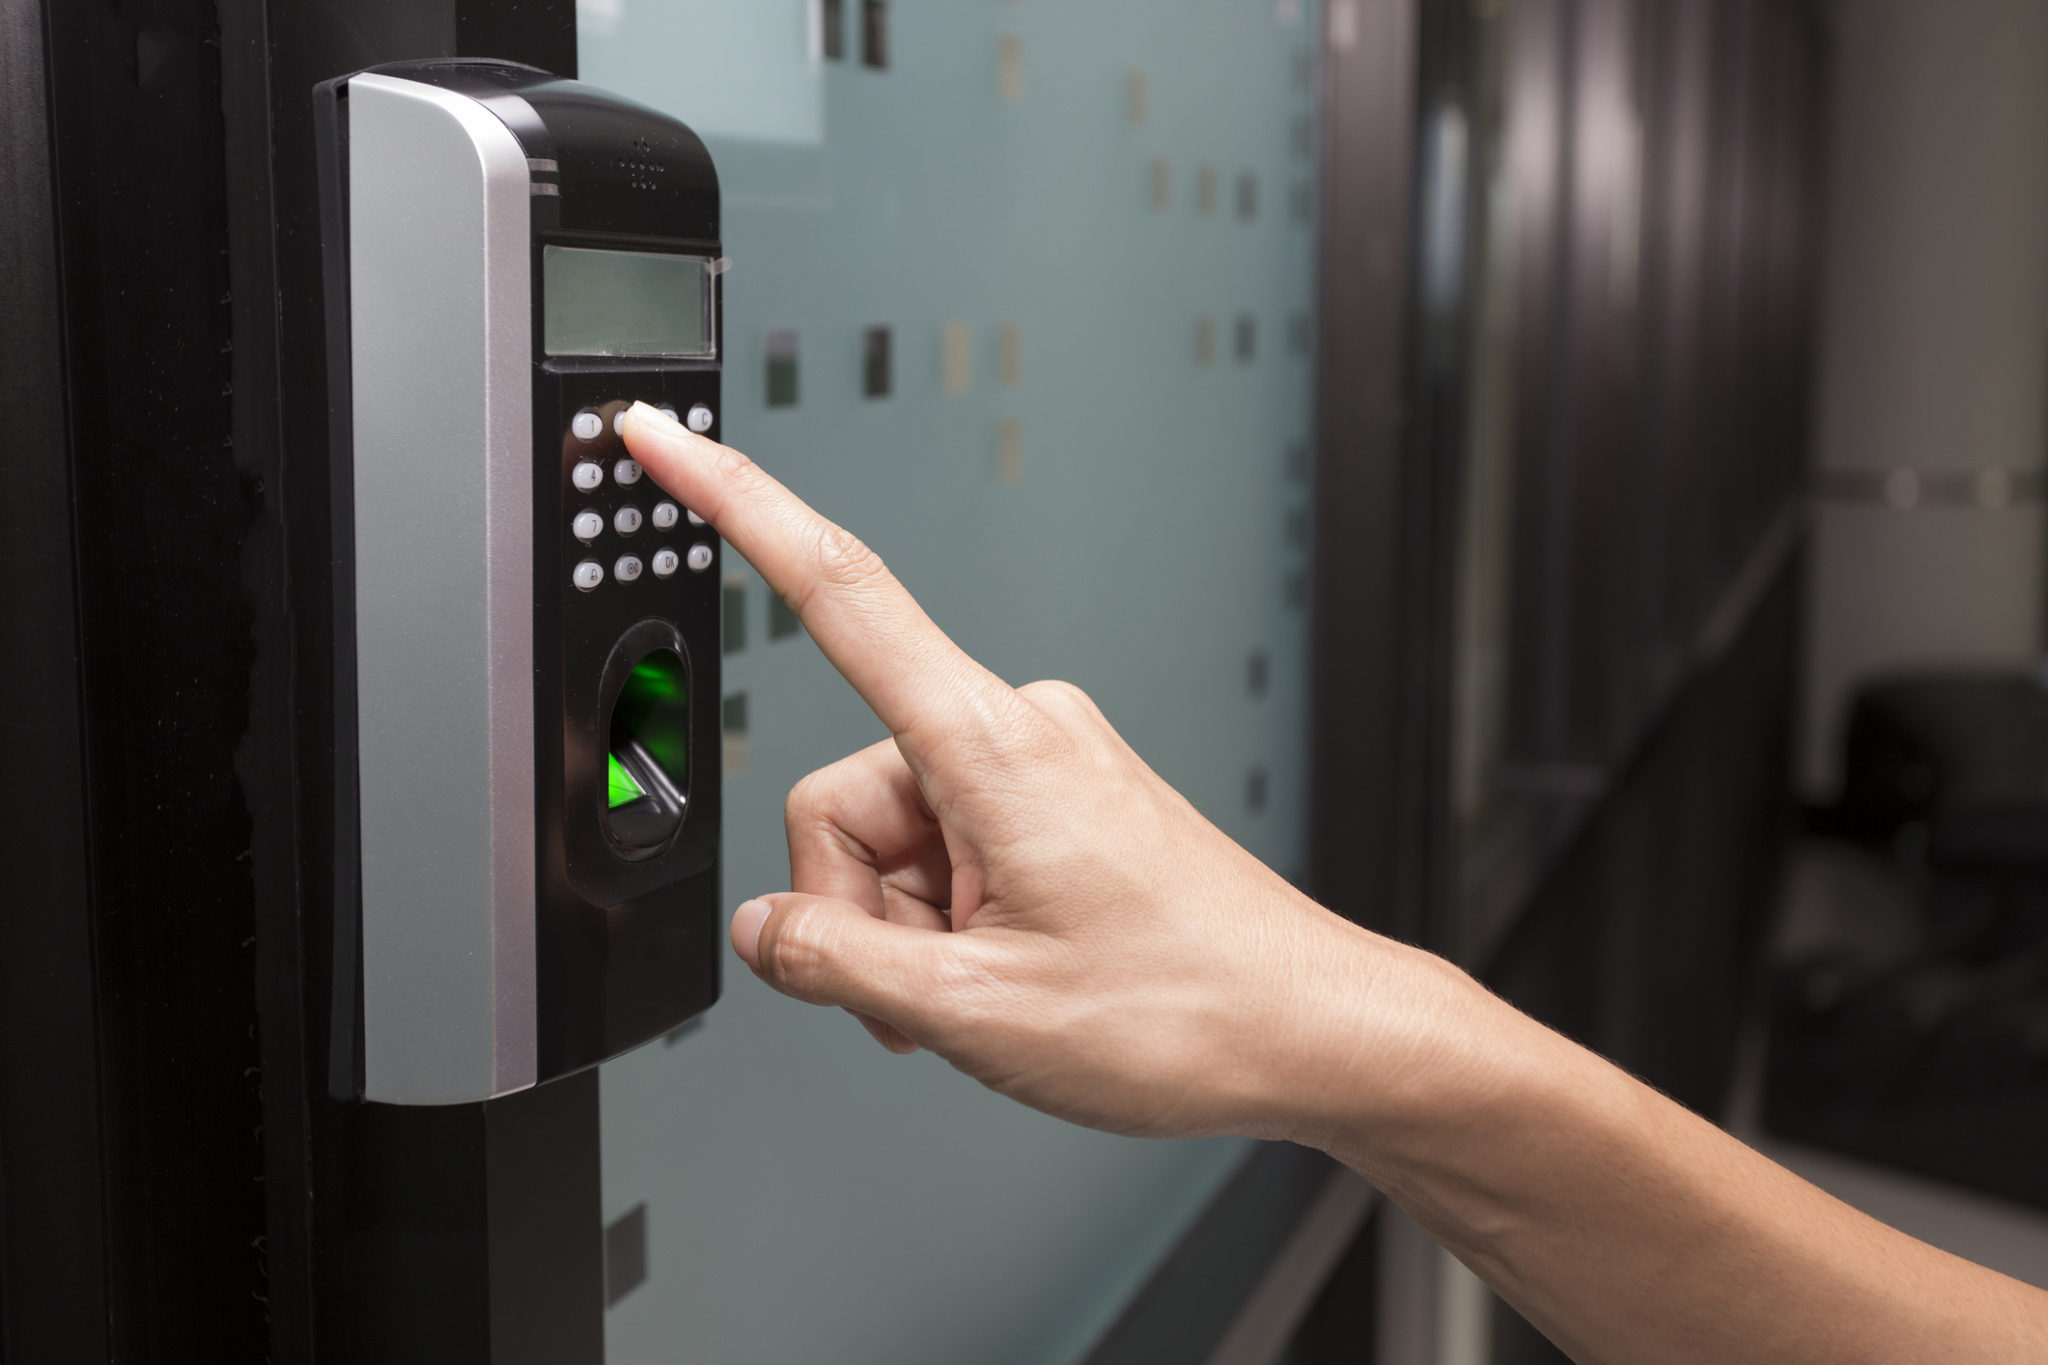 fingerprint and access control in a office building